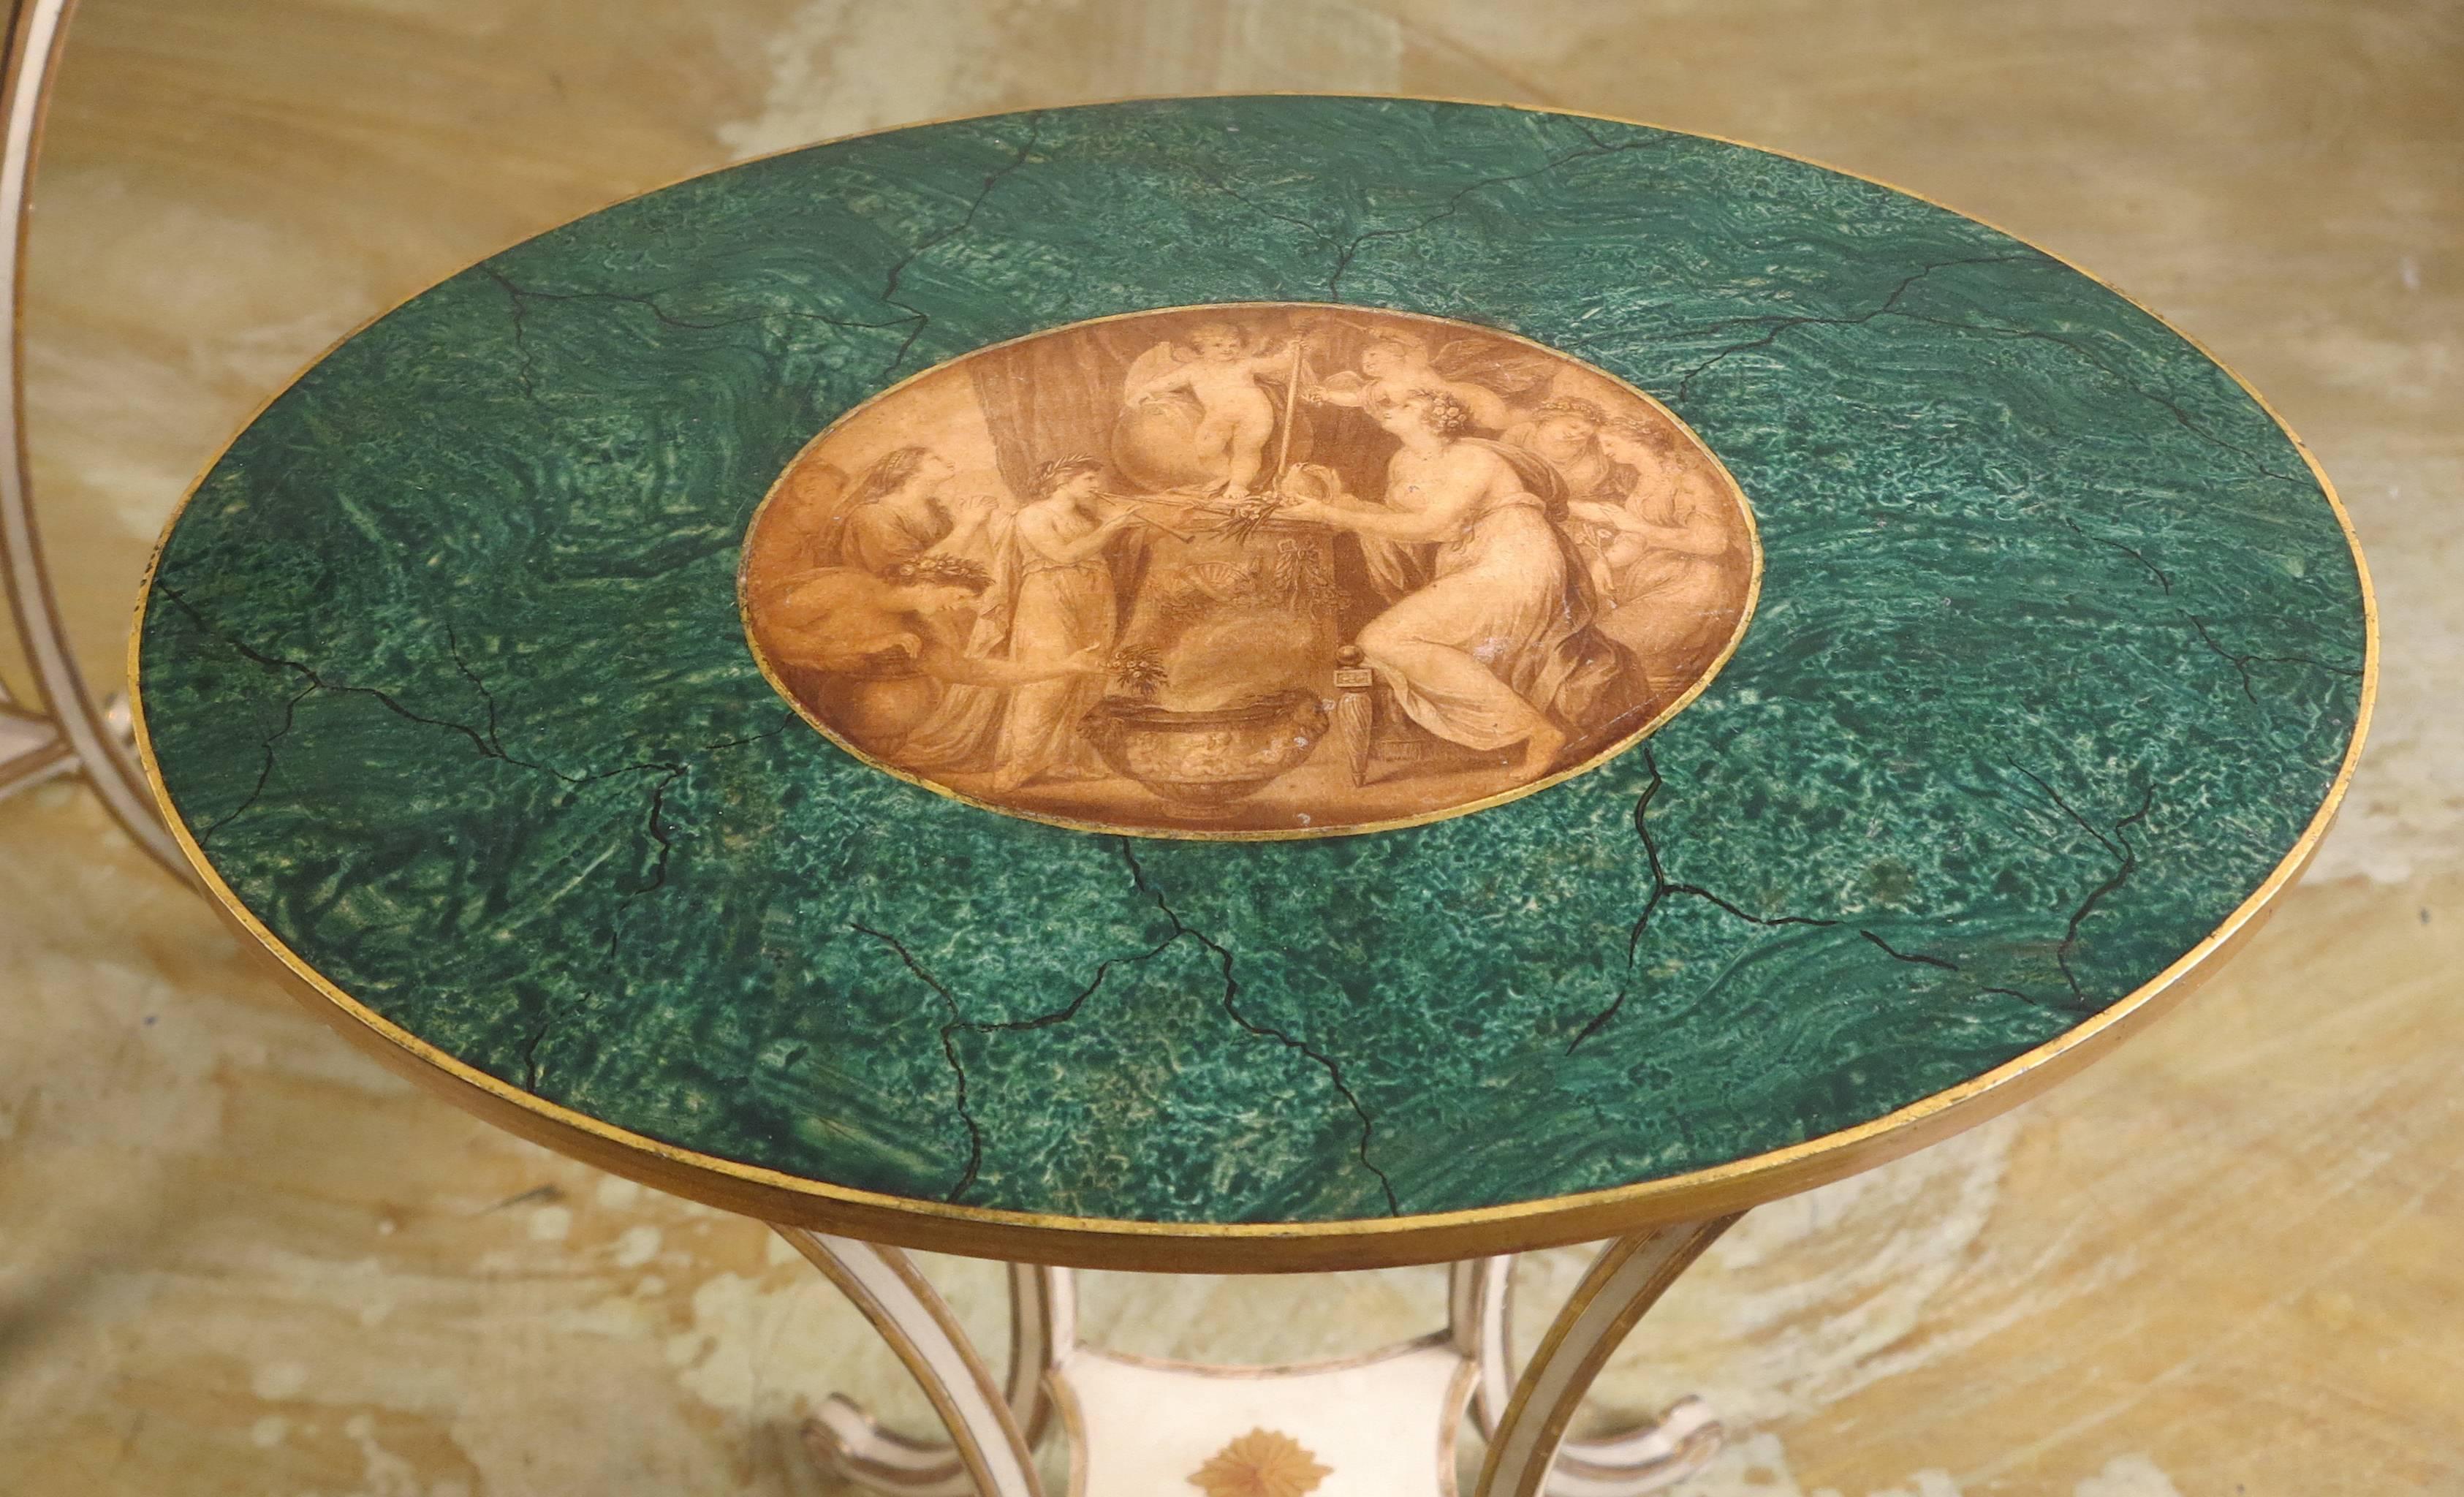 A fine pair of George III side tables
In Angelica Kauffman style
19th century

Each oval shaped top decorated with a central mythological painted scene surround with faux marbleized surface.
On four tapering shaped legs ending with a scrolled